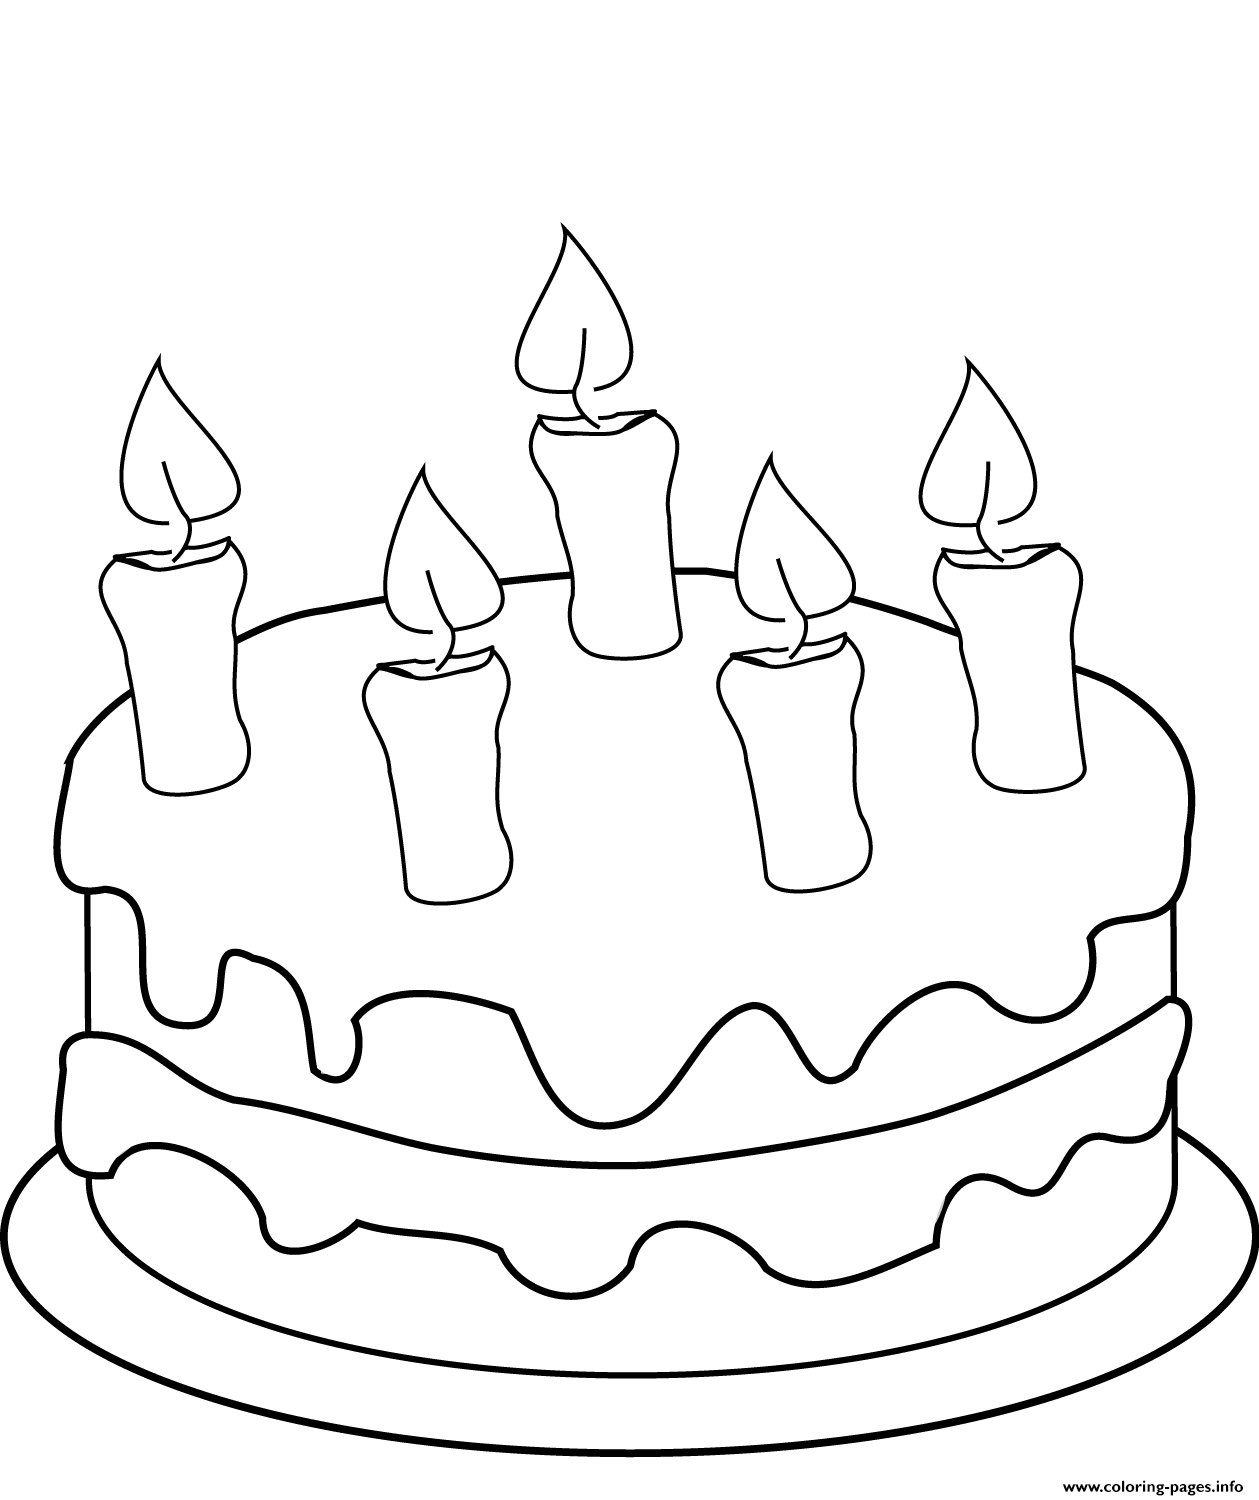 Birthday Cake With Five Candles coloring